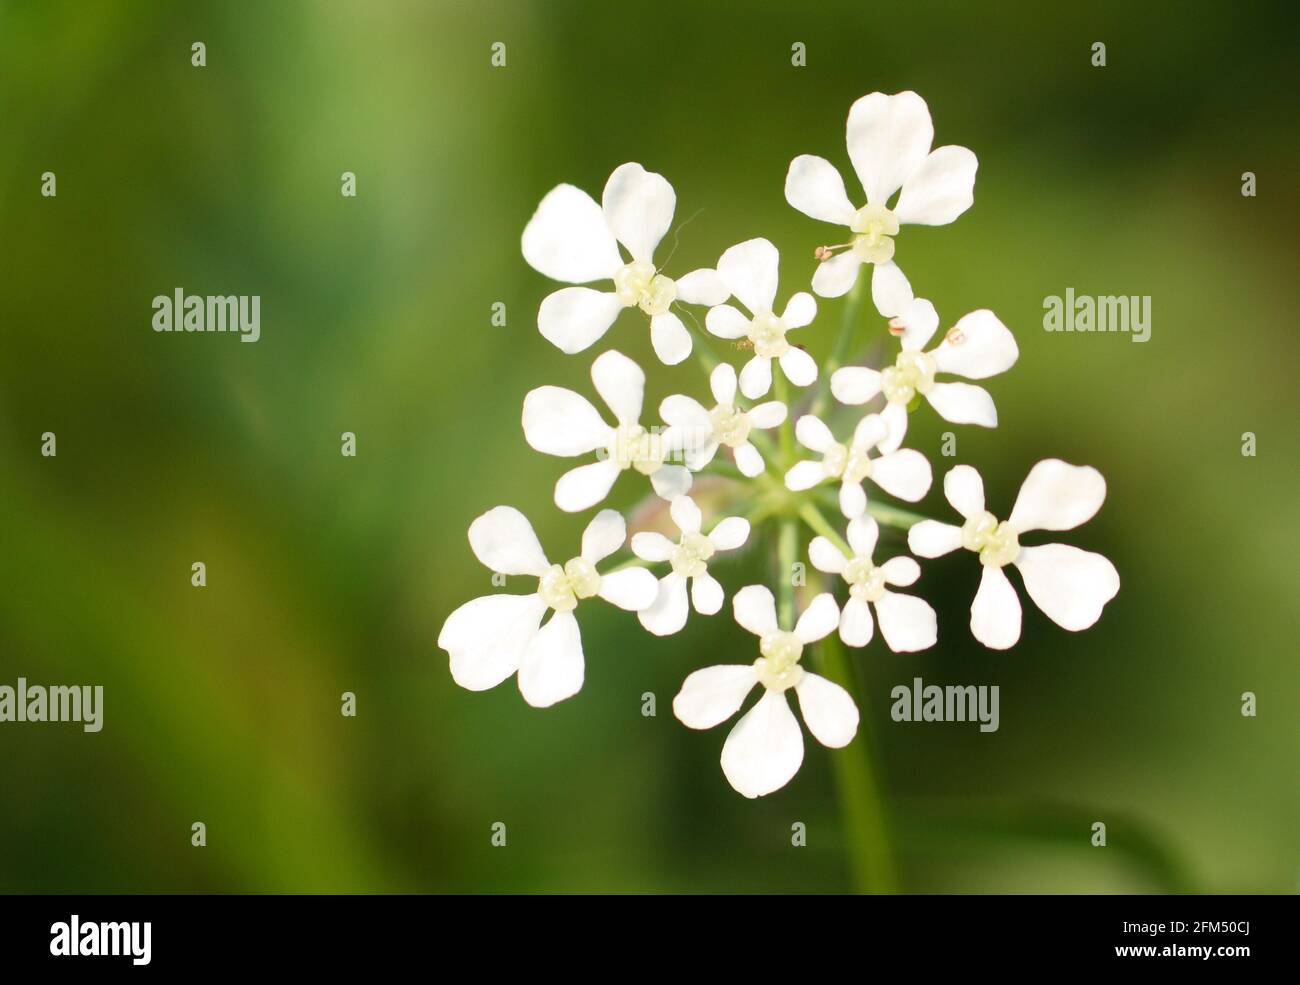 Macro close-up of an umbel of white Cow Parsley flowers (Anthriscus sylvestris) Stock Photo